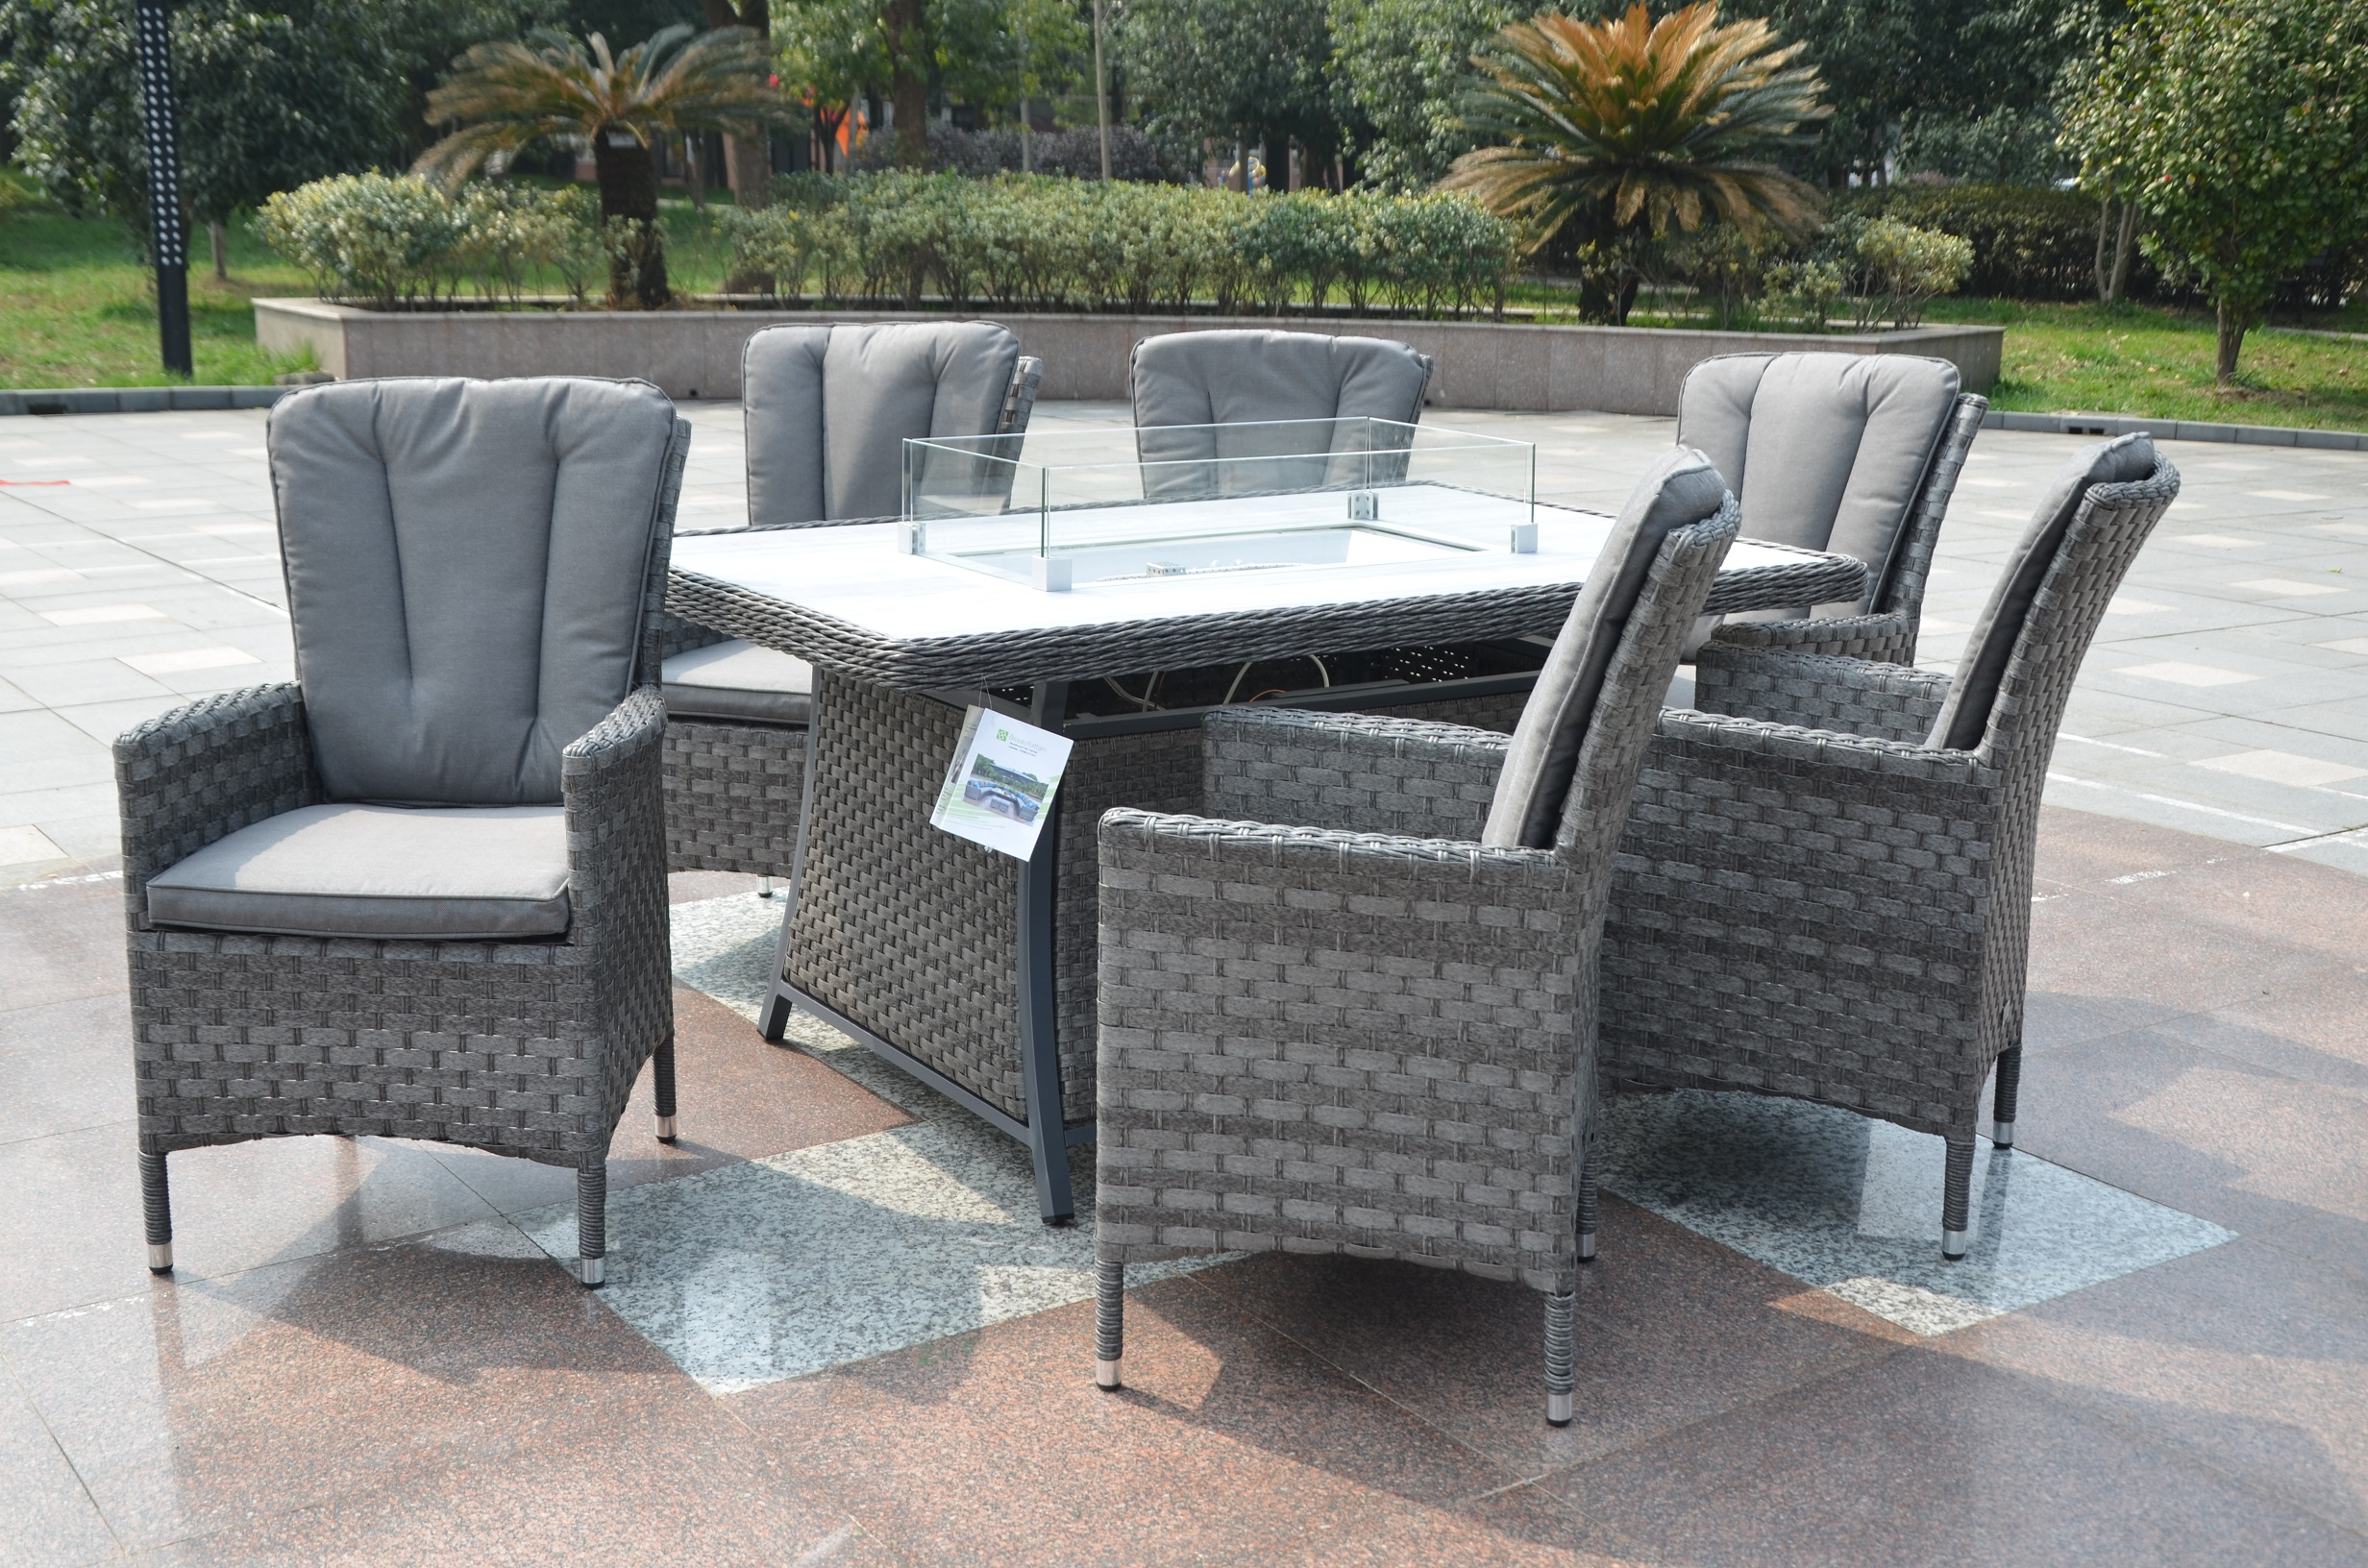 Rattan Garden Furniture Dining Sets Best Quality Rattan in size 2464 X 1632